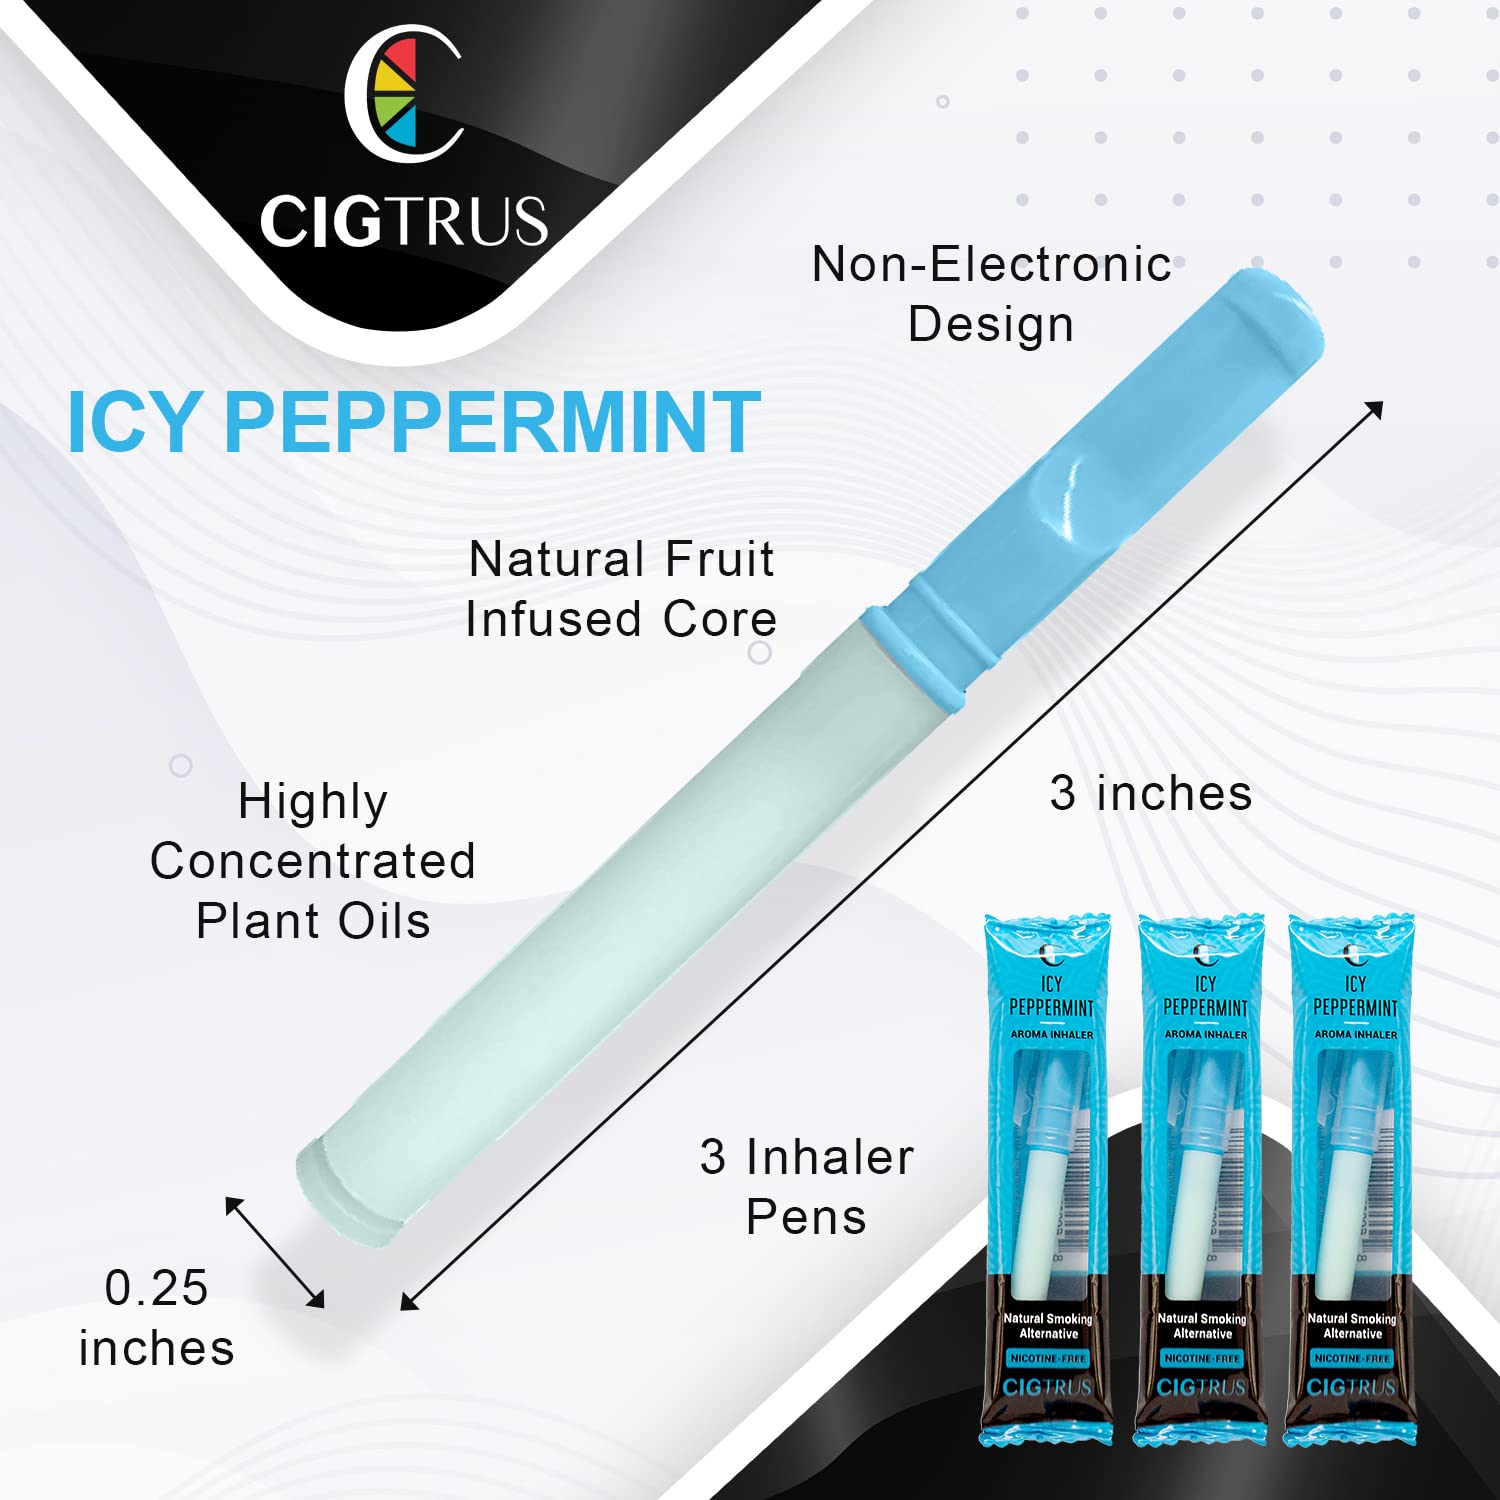 Cigtrus Oral Fixation Craving Relief 3 Pack Quit Smoking Aid Tobacco Free Nicotine Free Non-Electric Support Icy Peppermint Flavor Oxygen Inhaler